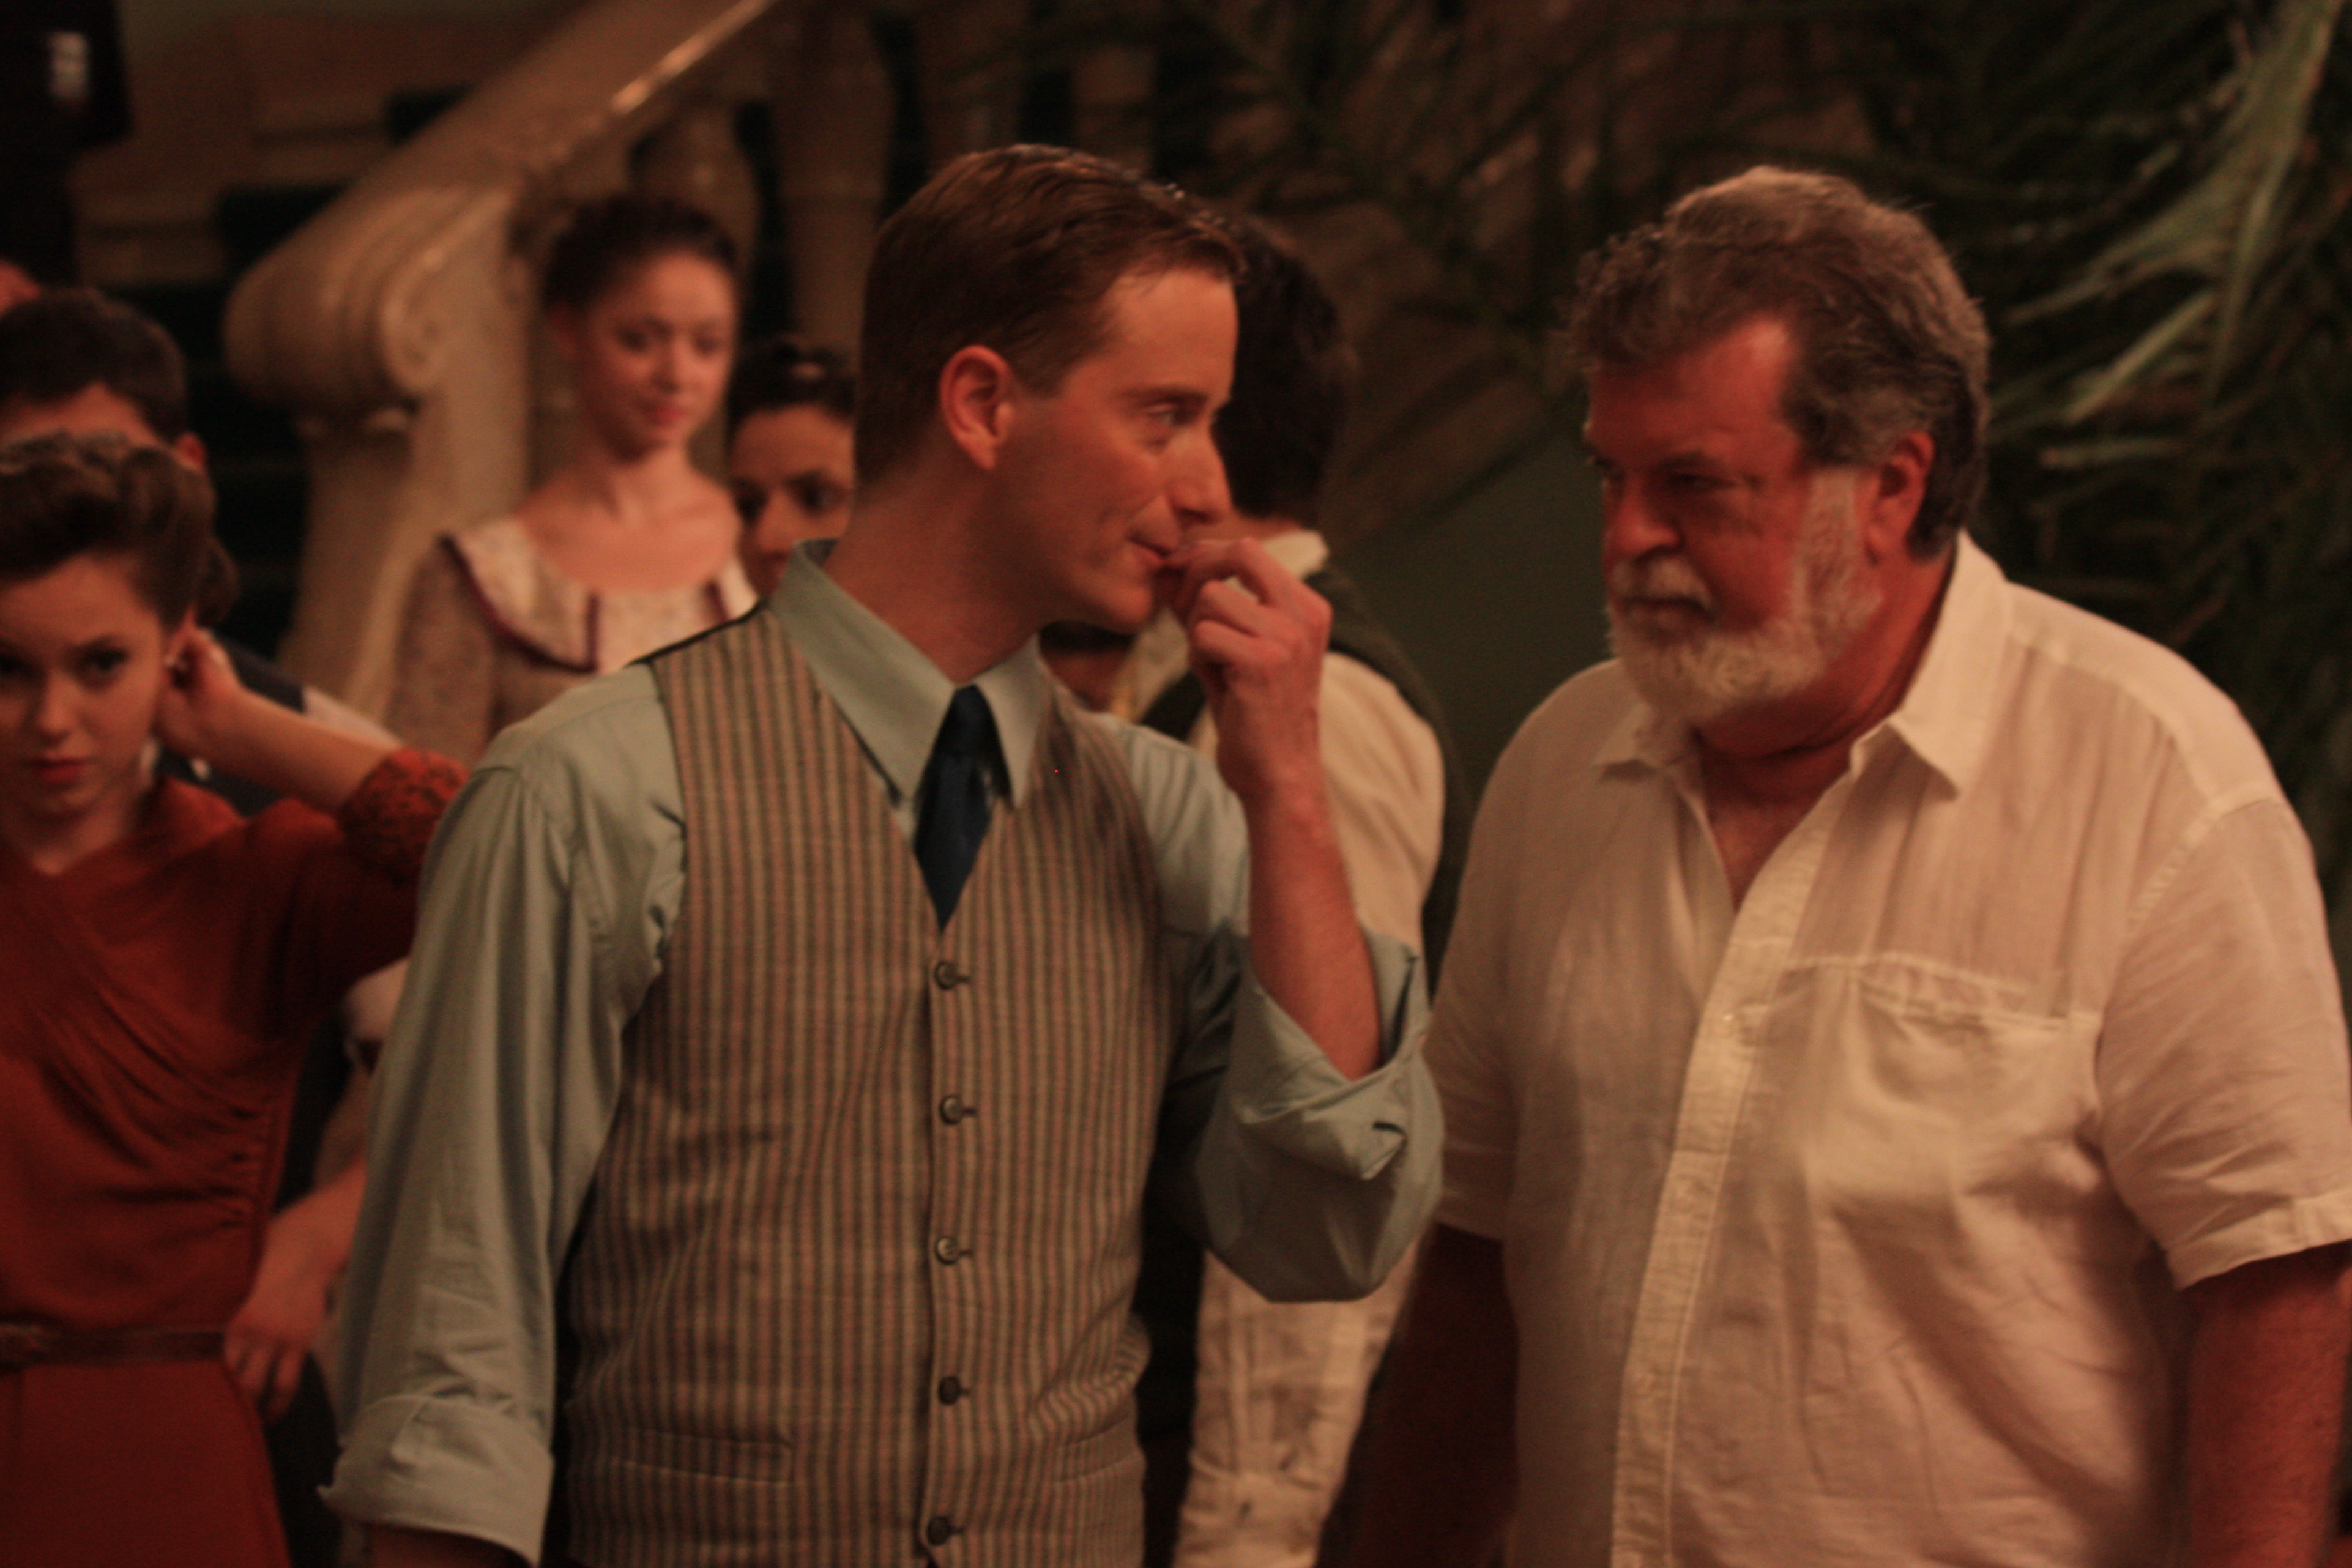 Actor JEFFREY C. HAWKINS with Director of Photography DEAN CUNDEY on the set of WALKING WITH THE ENEMY.